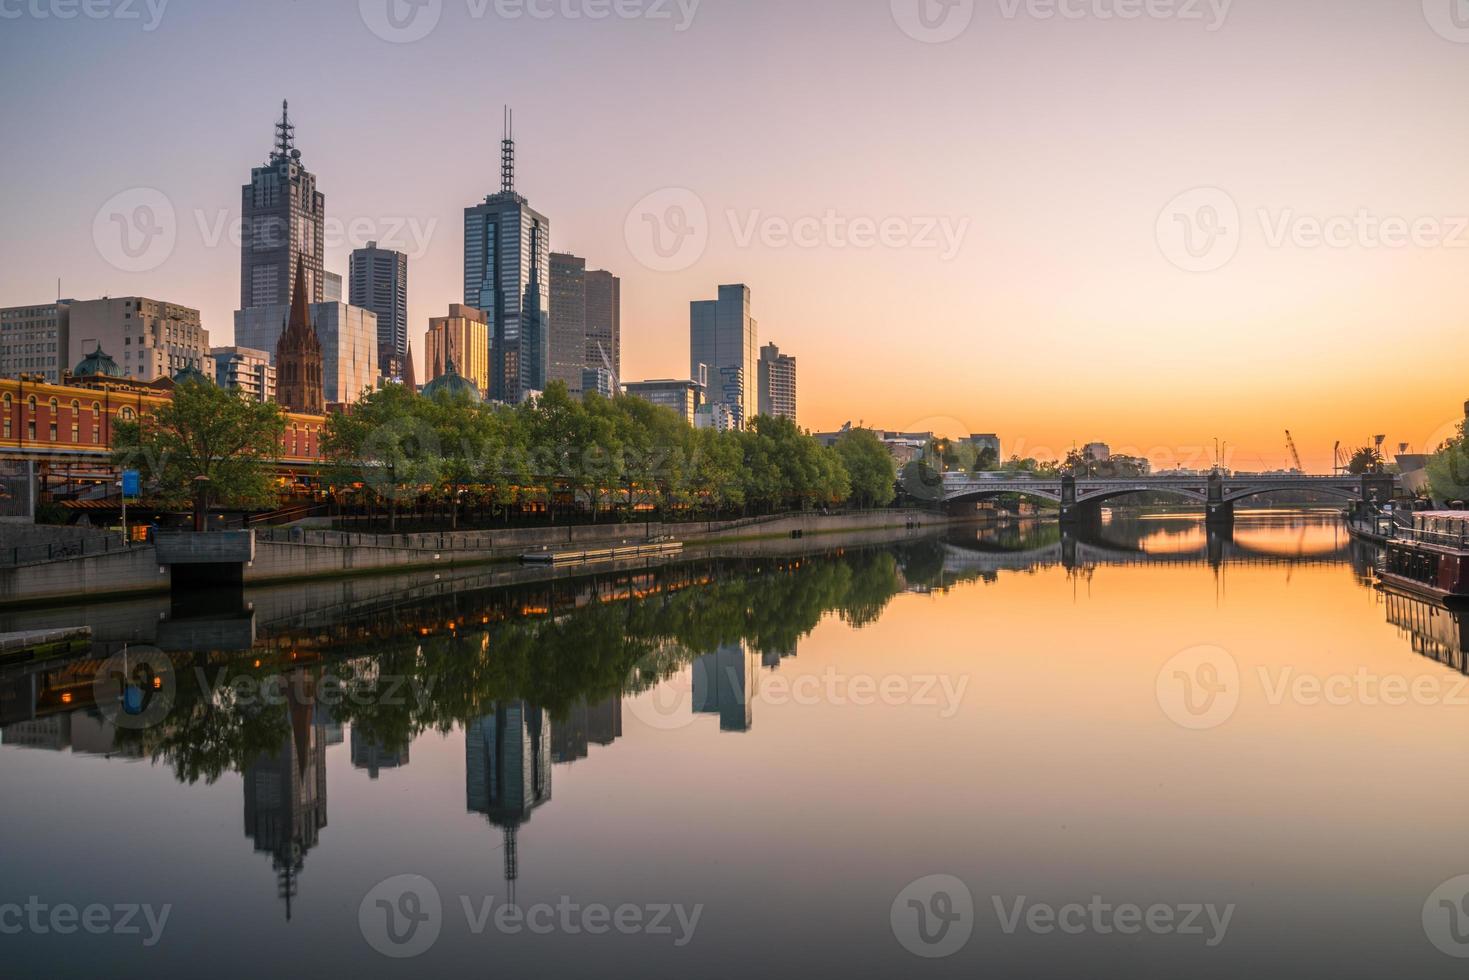 Melbourne cityscape in the morning sunrise, Victoria state of Australia. Melbourne is one of the most livable cities in the world. photo